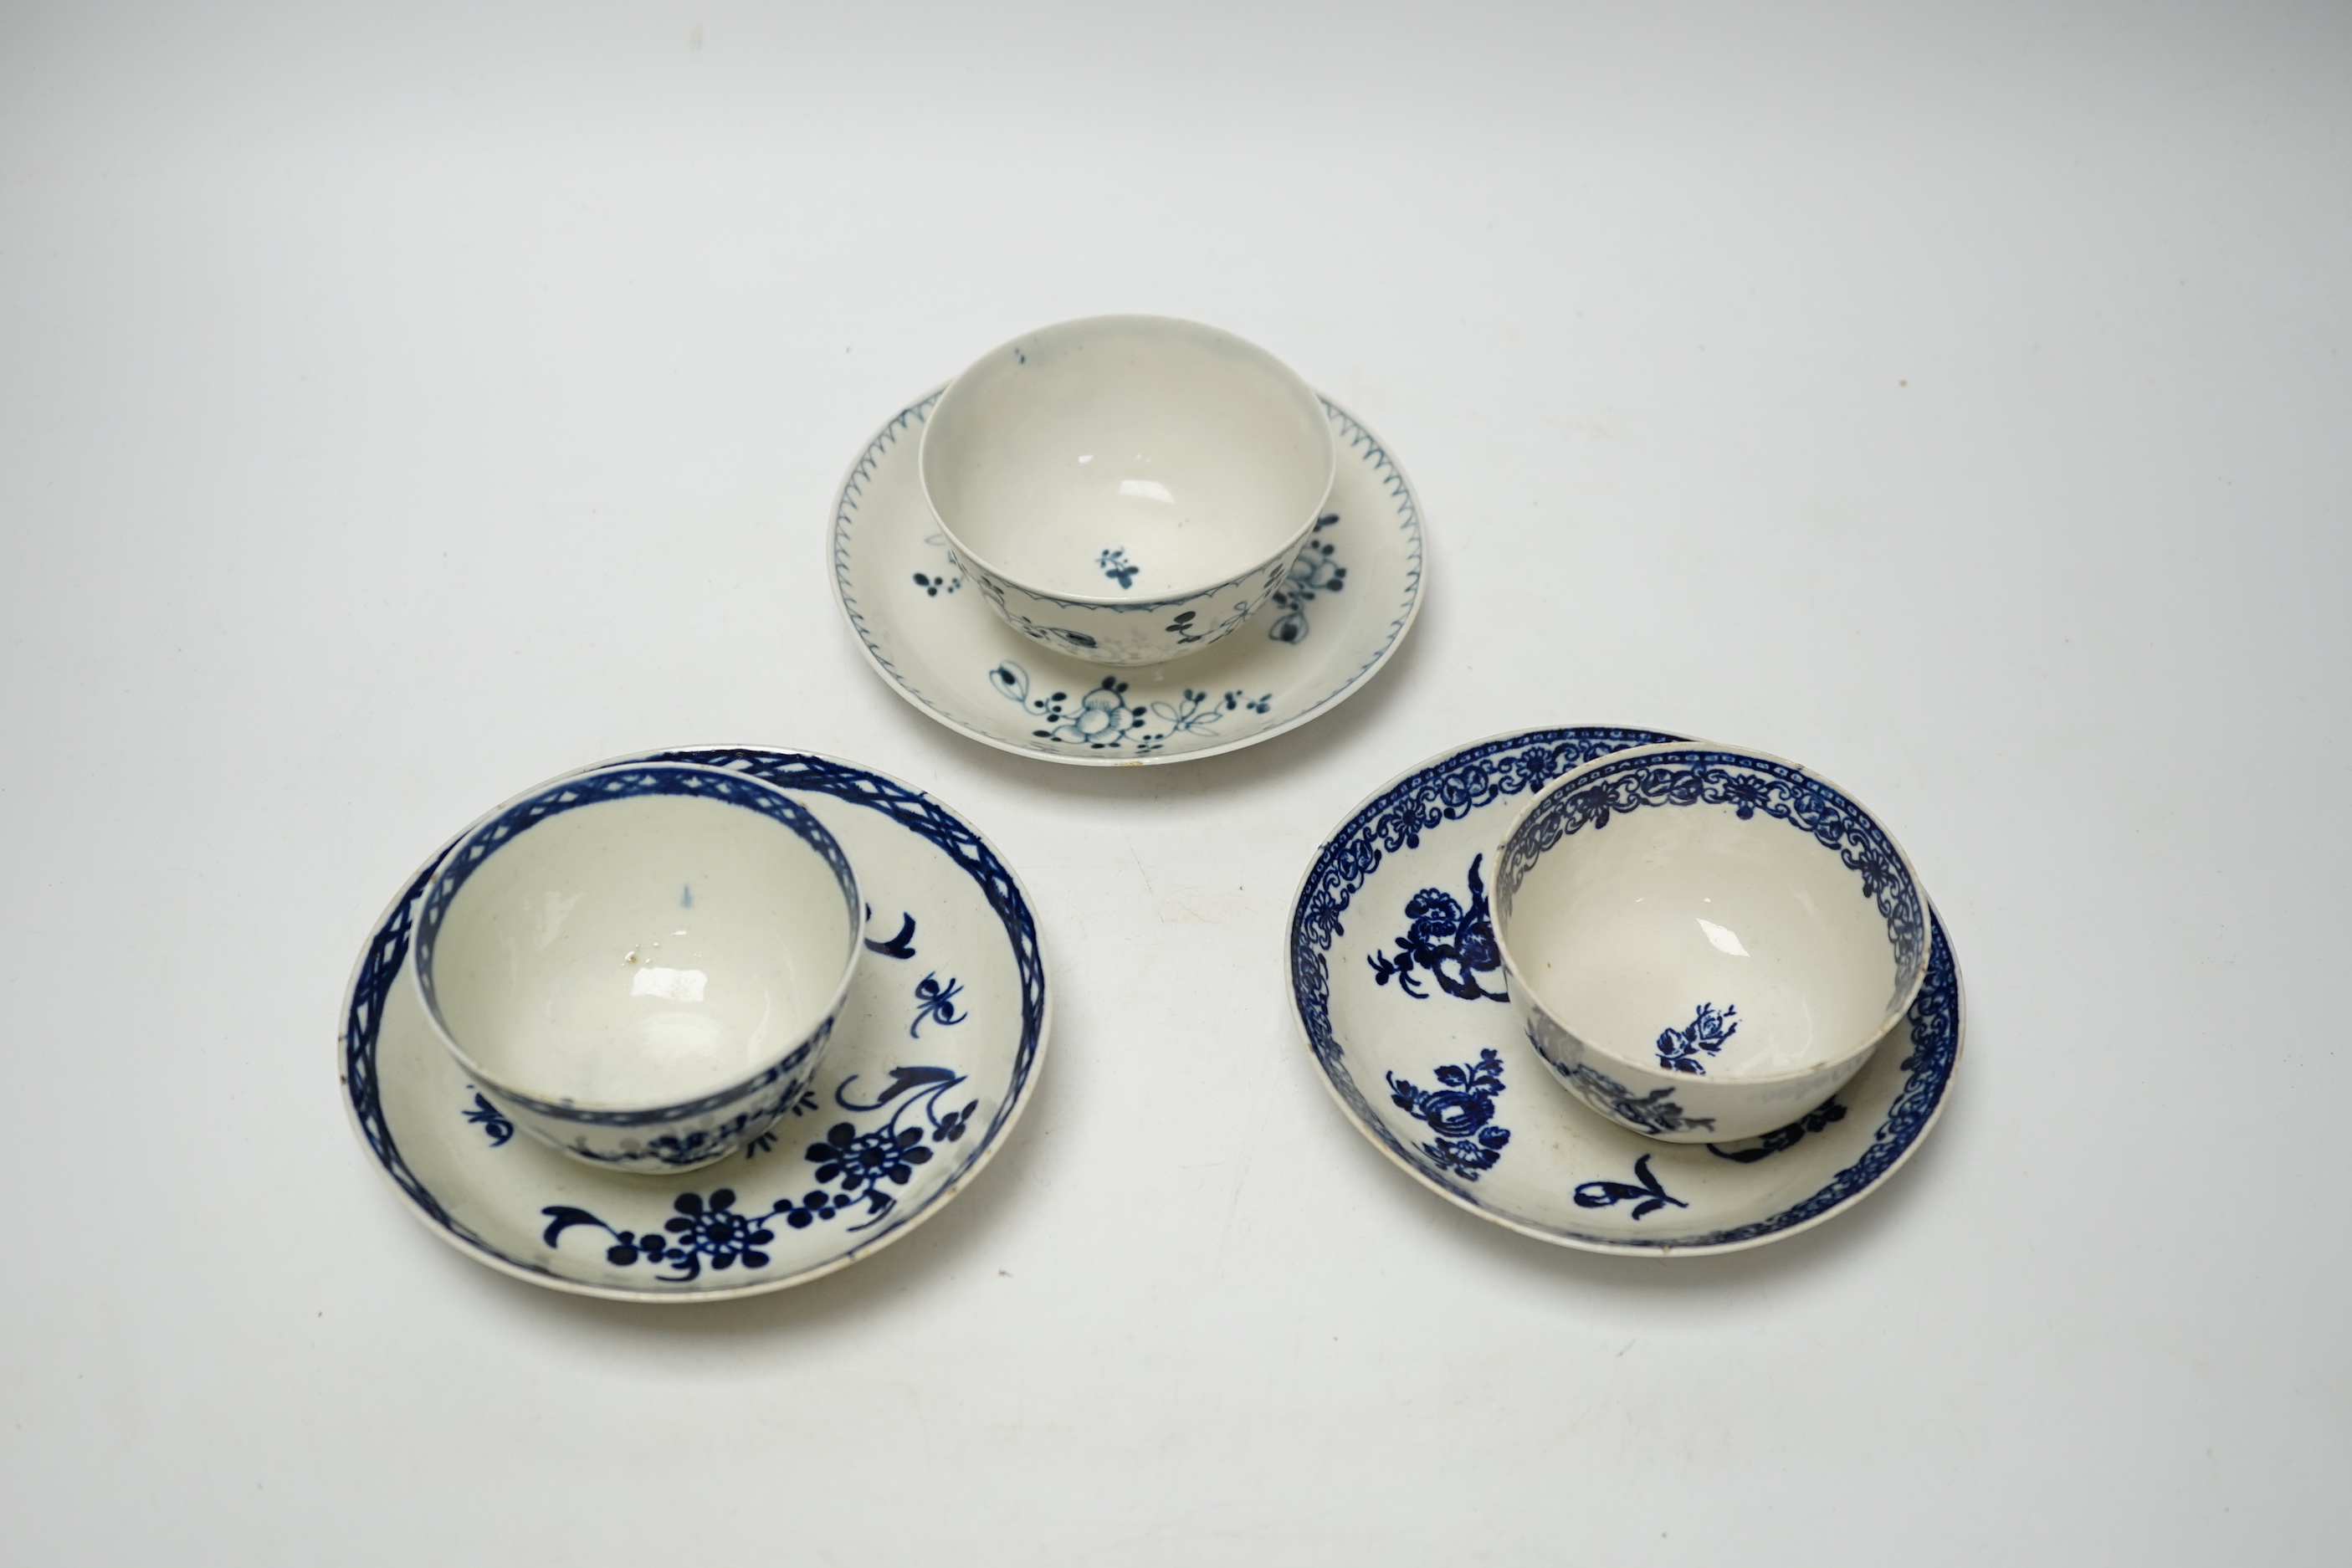 Three late 18th century Liverpool blue and white teabowls and saucers